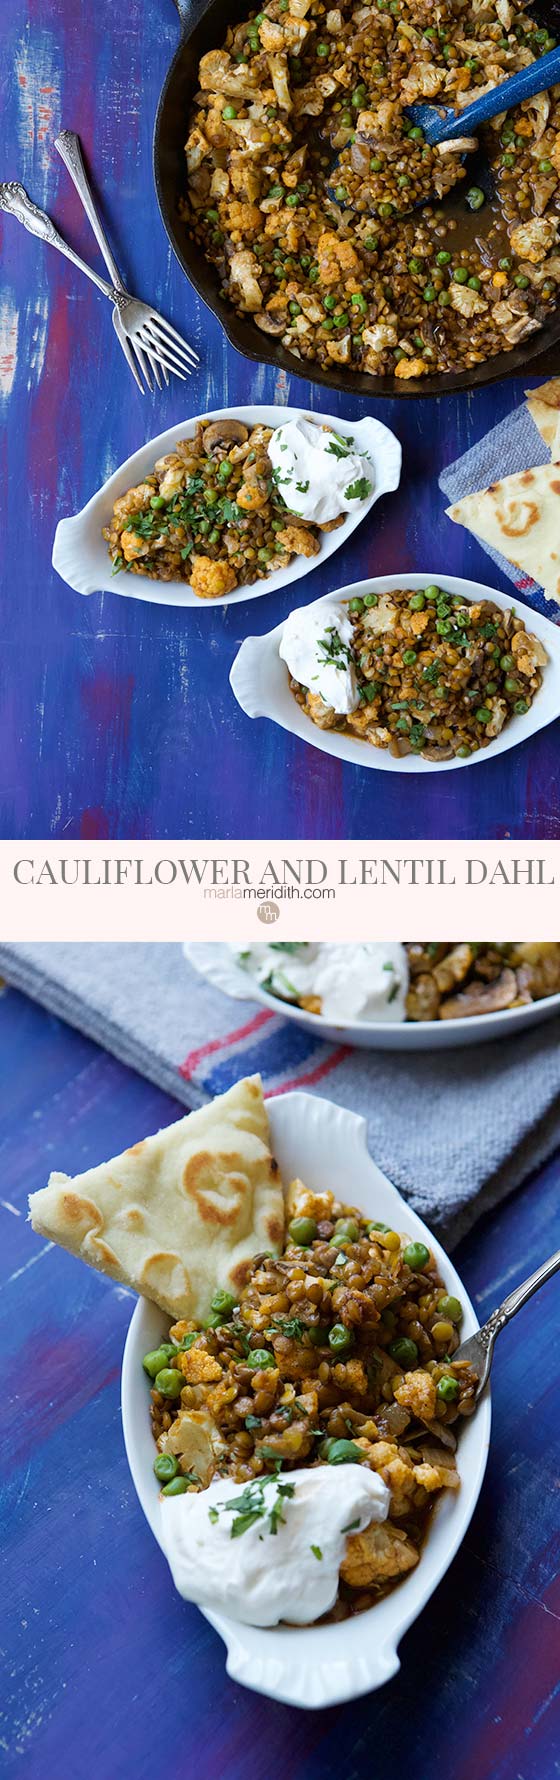 Try this healthy, vegetarian Lentil and Cauliflower Dahl recipe for Meatless Monday. We love this authentic Indian dish for lunch and dinner. MarlaMeridith.com